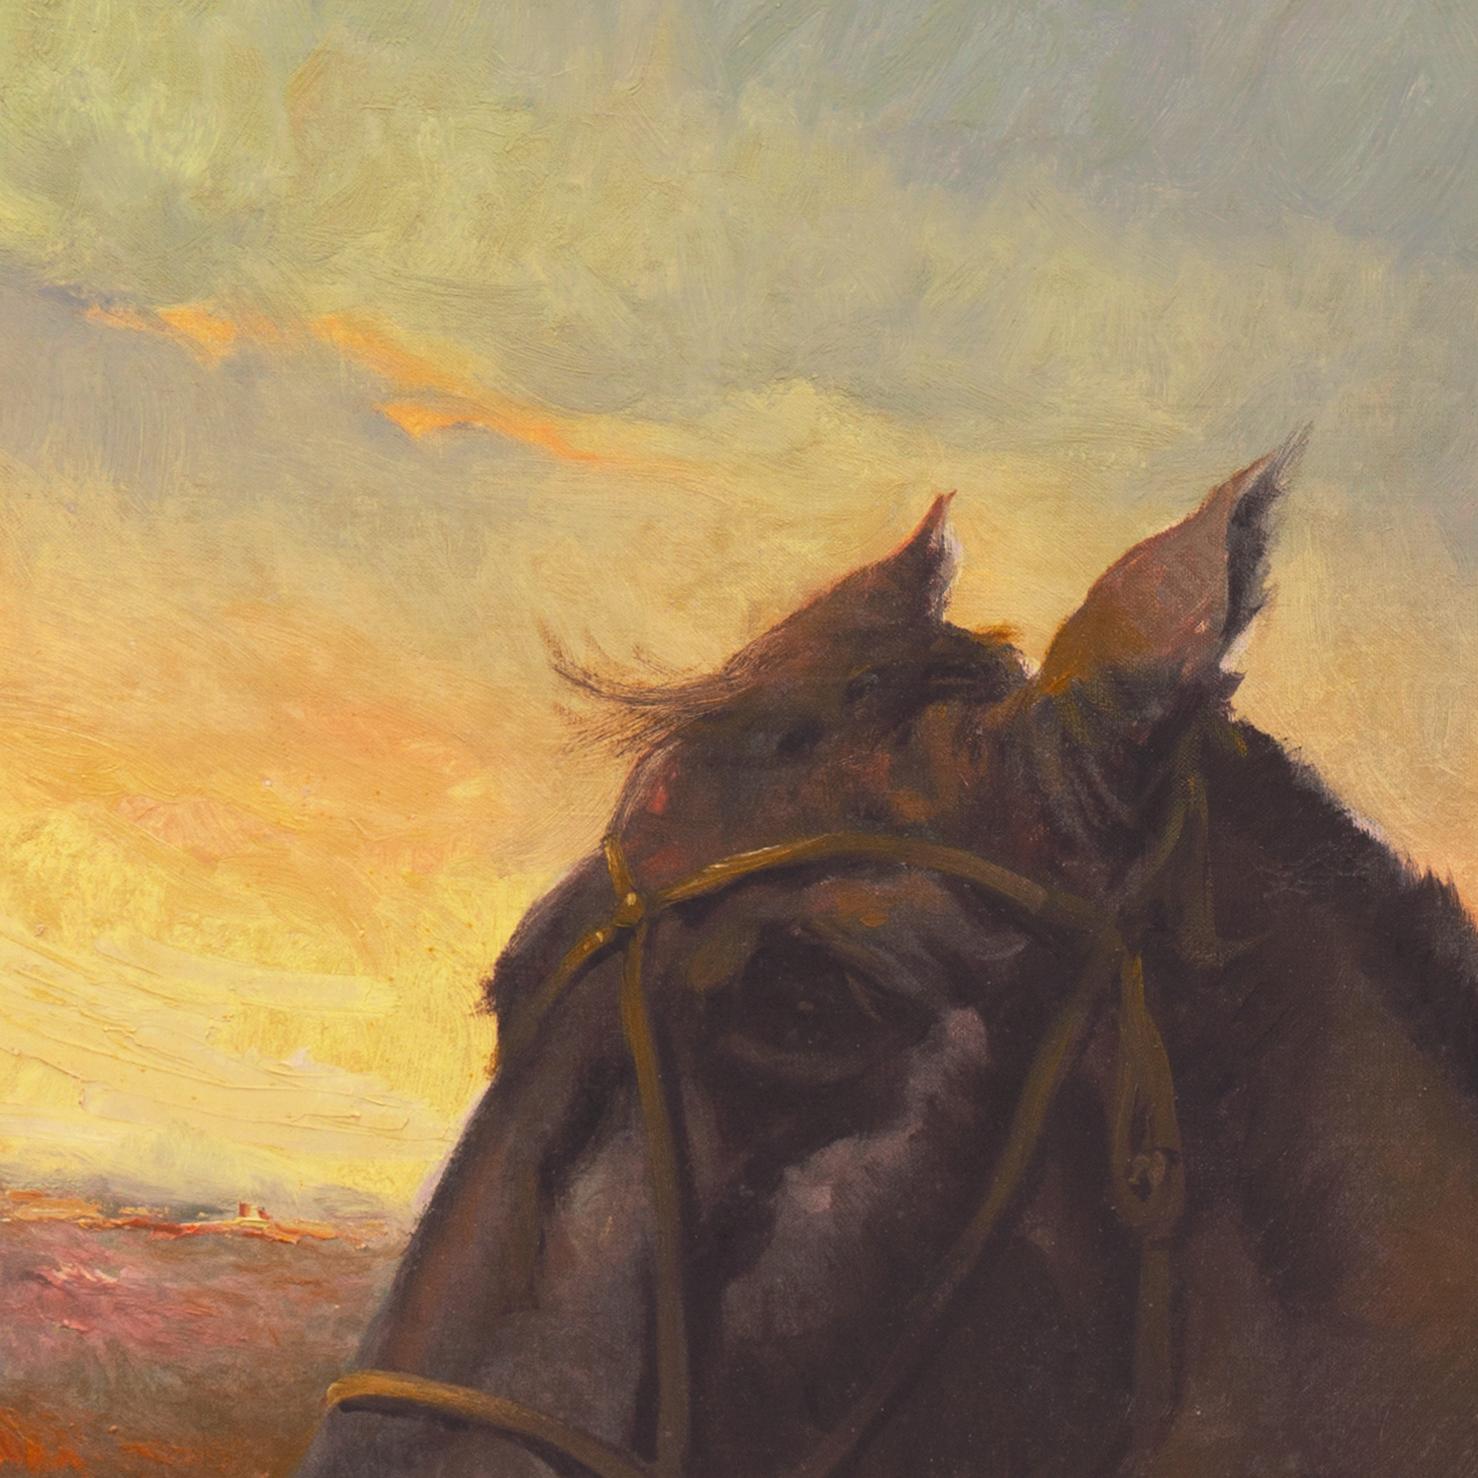 'Gaucho on a Criollo', Argentine Sunset, Pampas, Equestrian Study, Horse, Pony - Impressionist Painting by Morando Luque